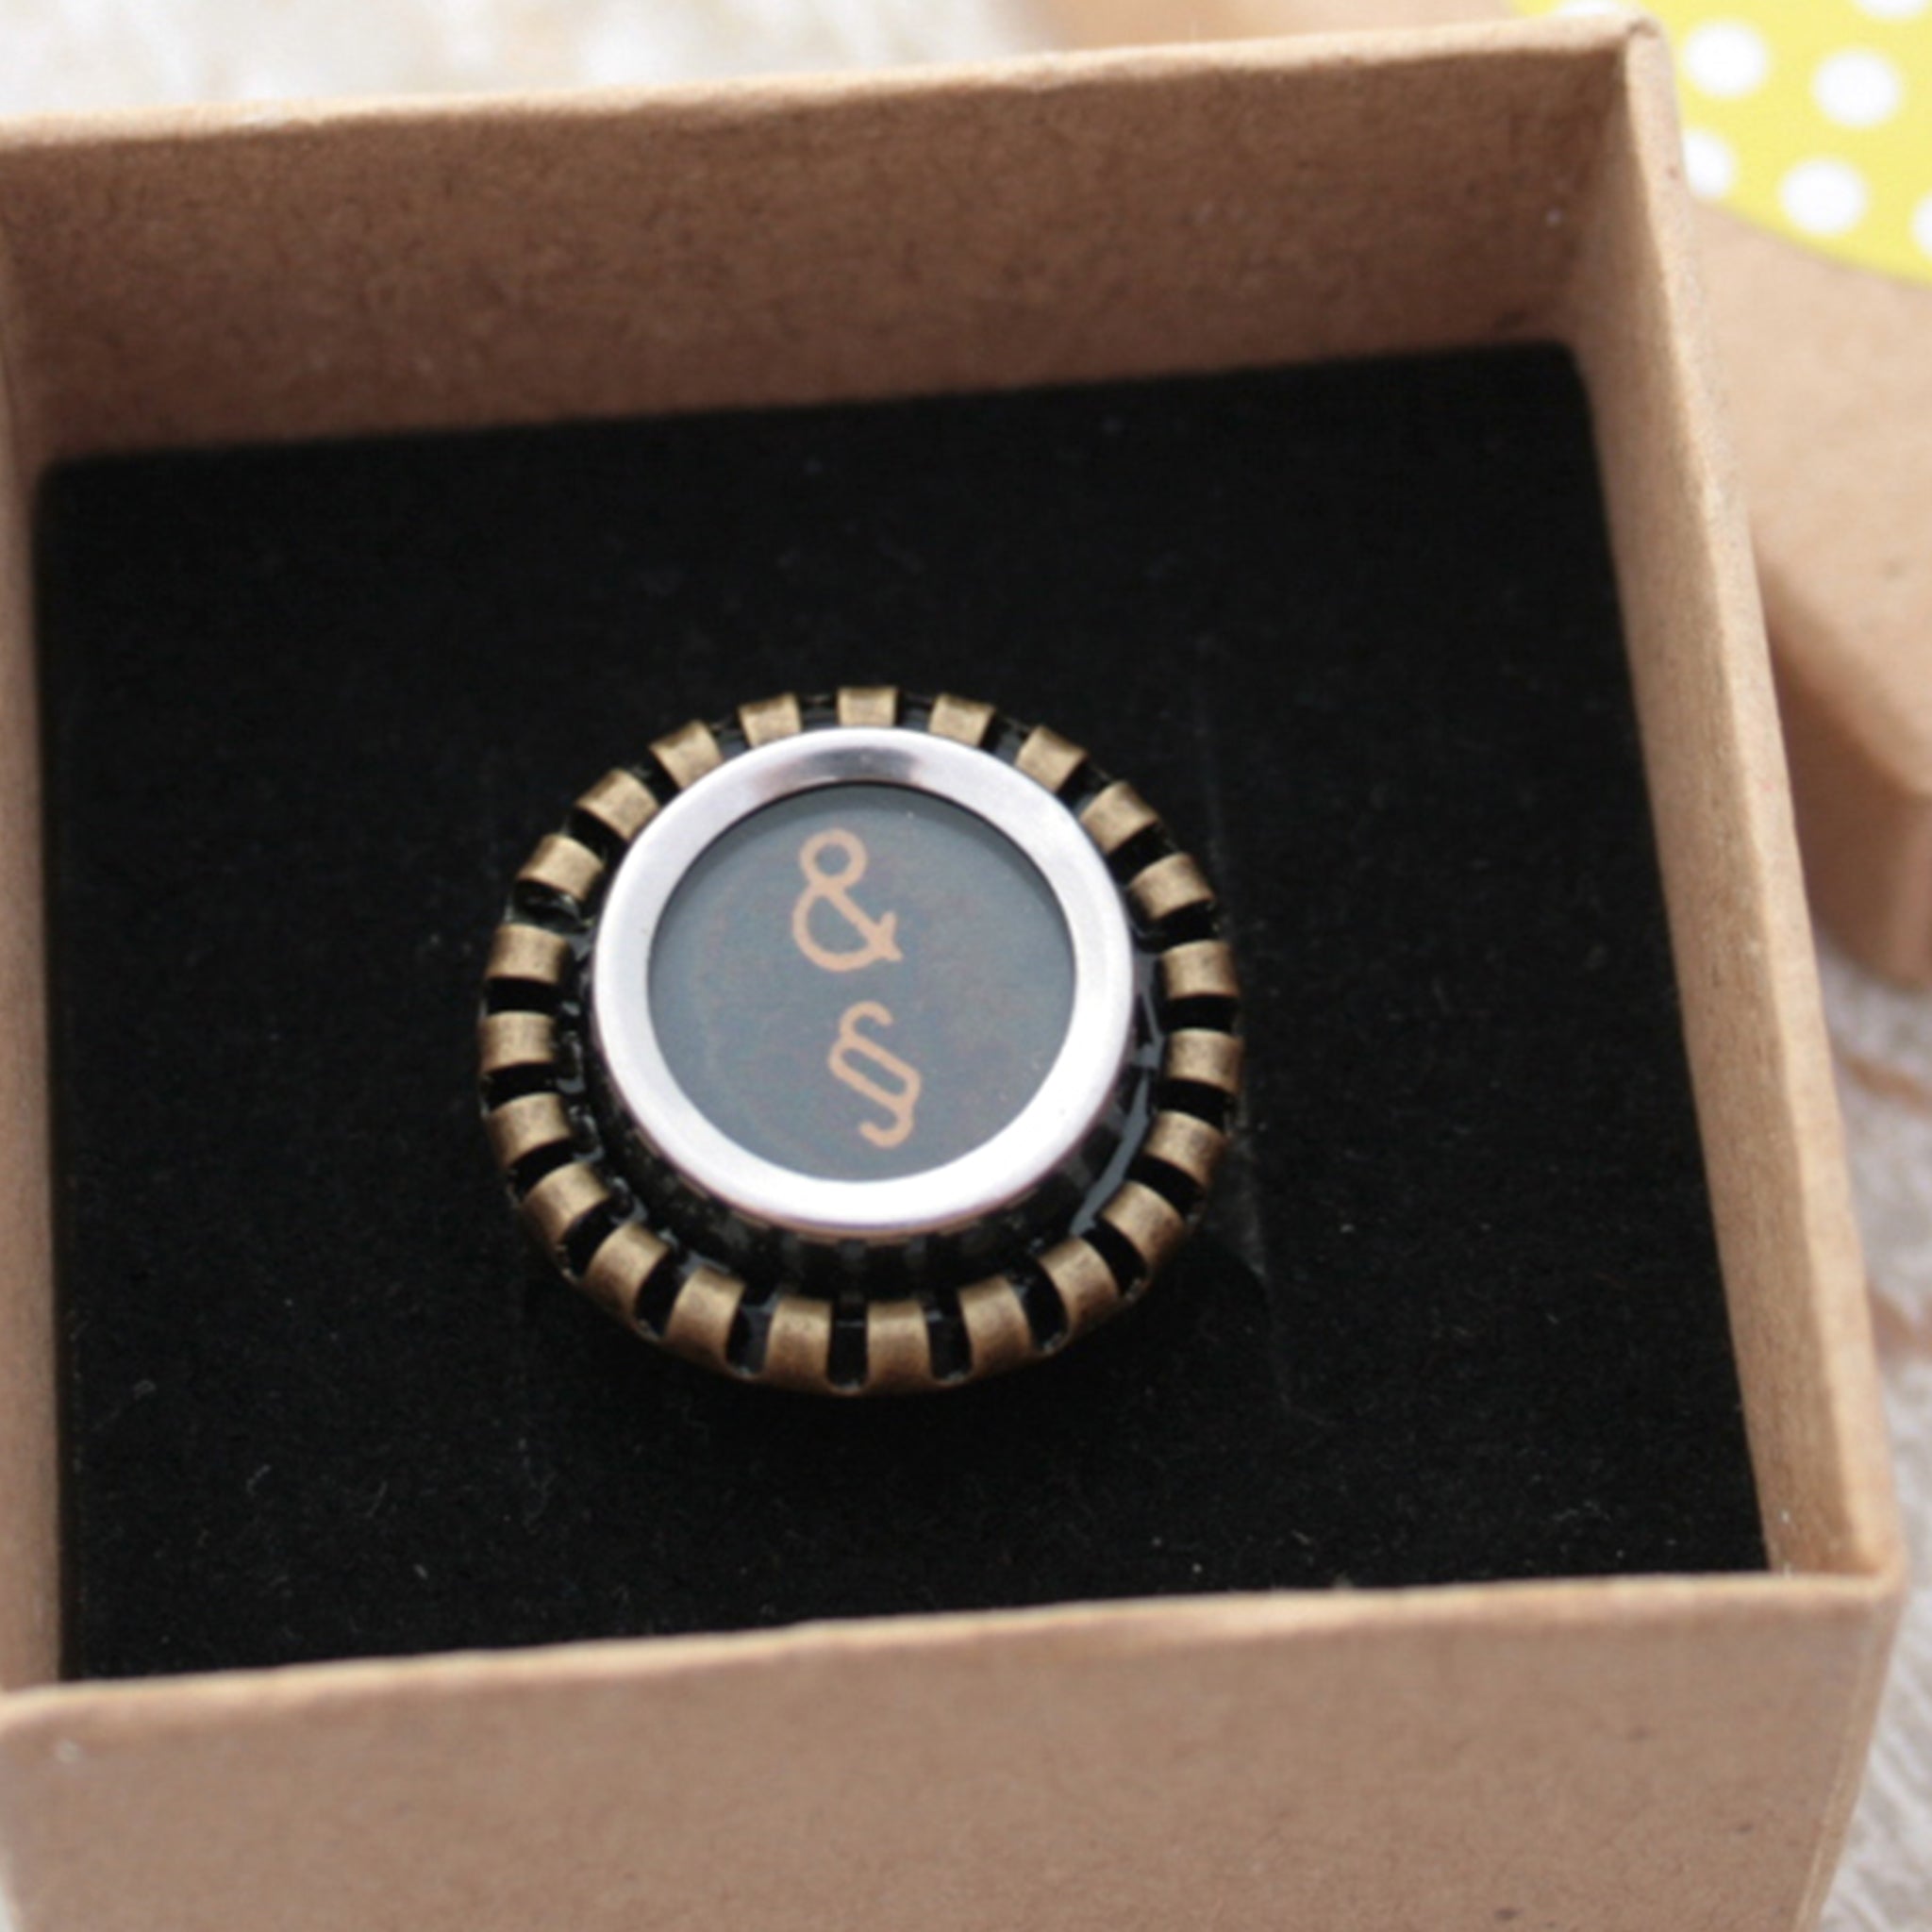 Black Ring featuring Amresand and paragraph signs made of typewriter key in a box